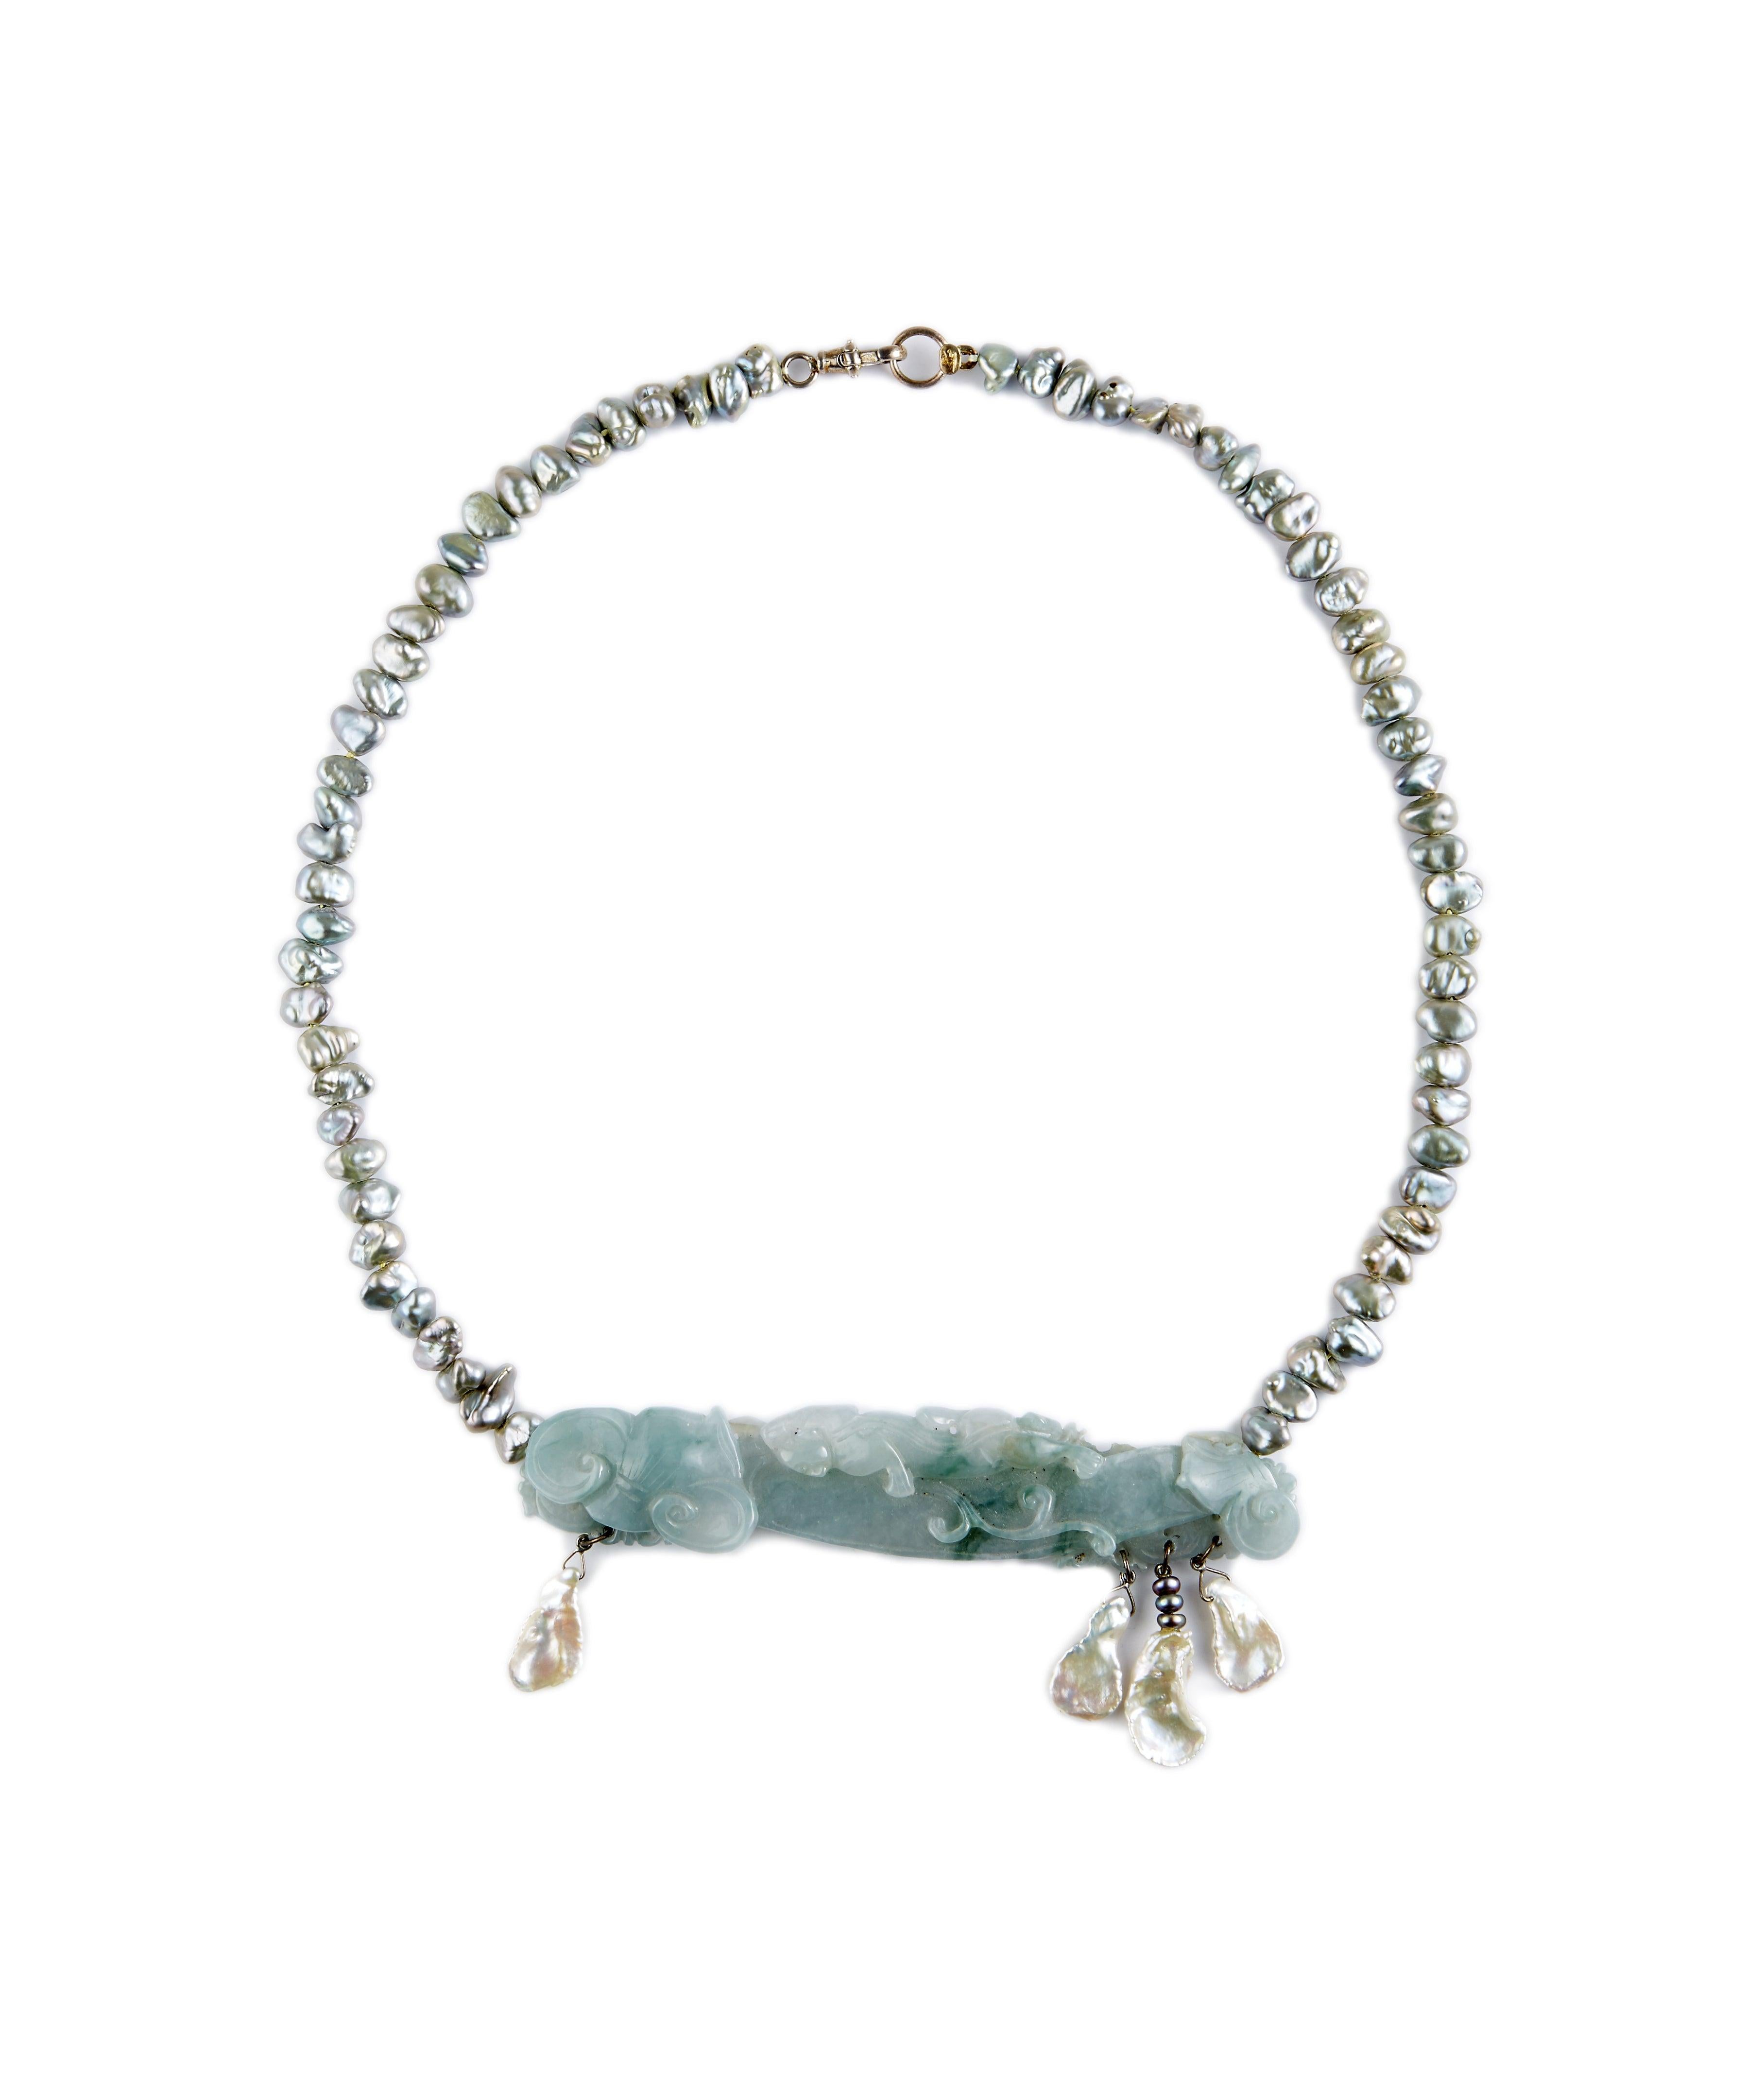 Erin Mac Blue Jade is the most unusual color Jadeite. This one is soft and awaits your meditation, bringing peace to your day... Hand-carved and dangles of white freshwater pearls draping from a strand of delicious blue/grey freshwater pearls. I was